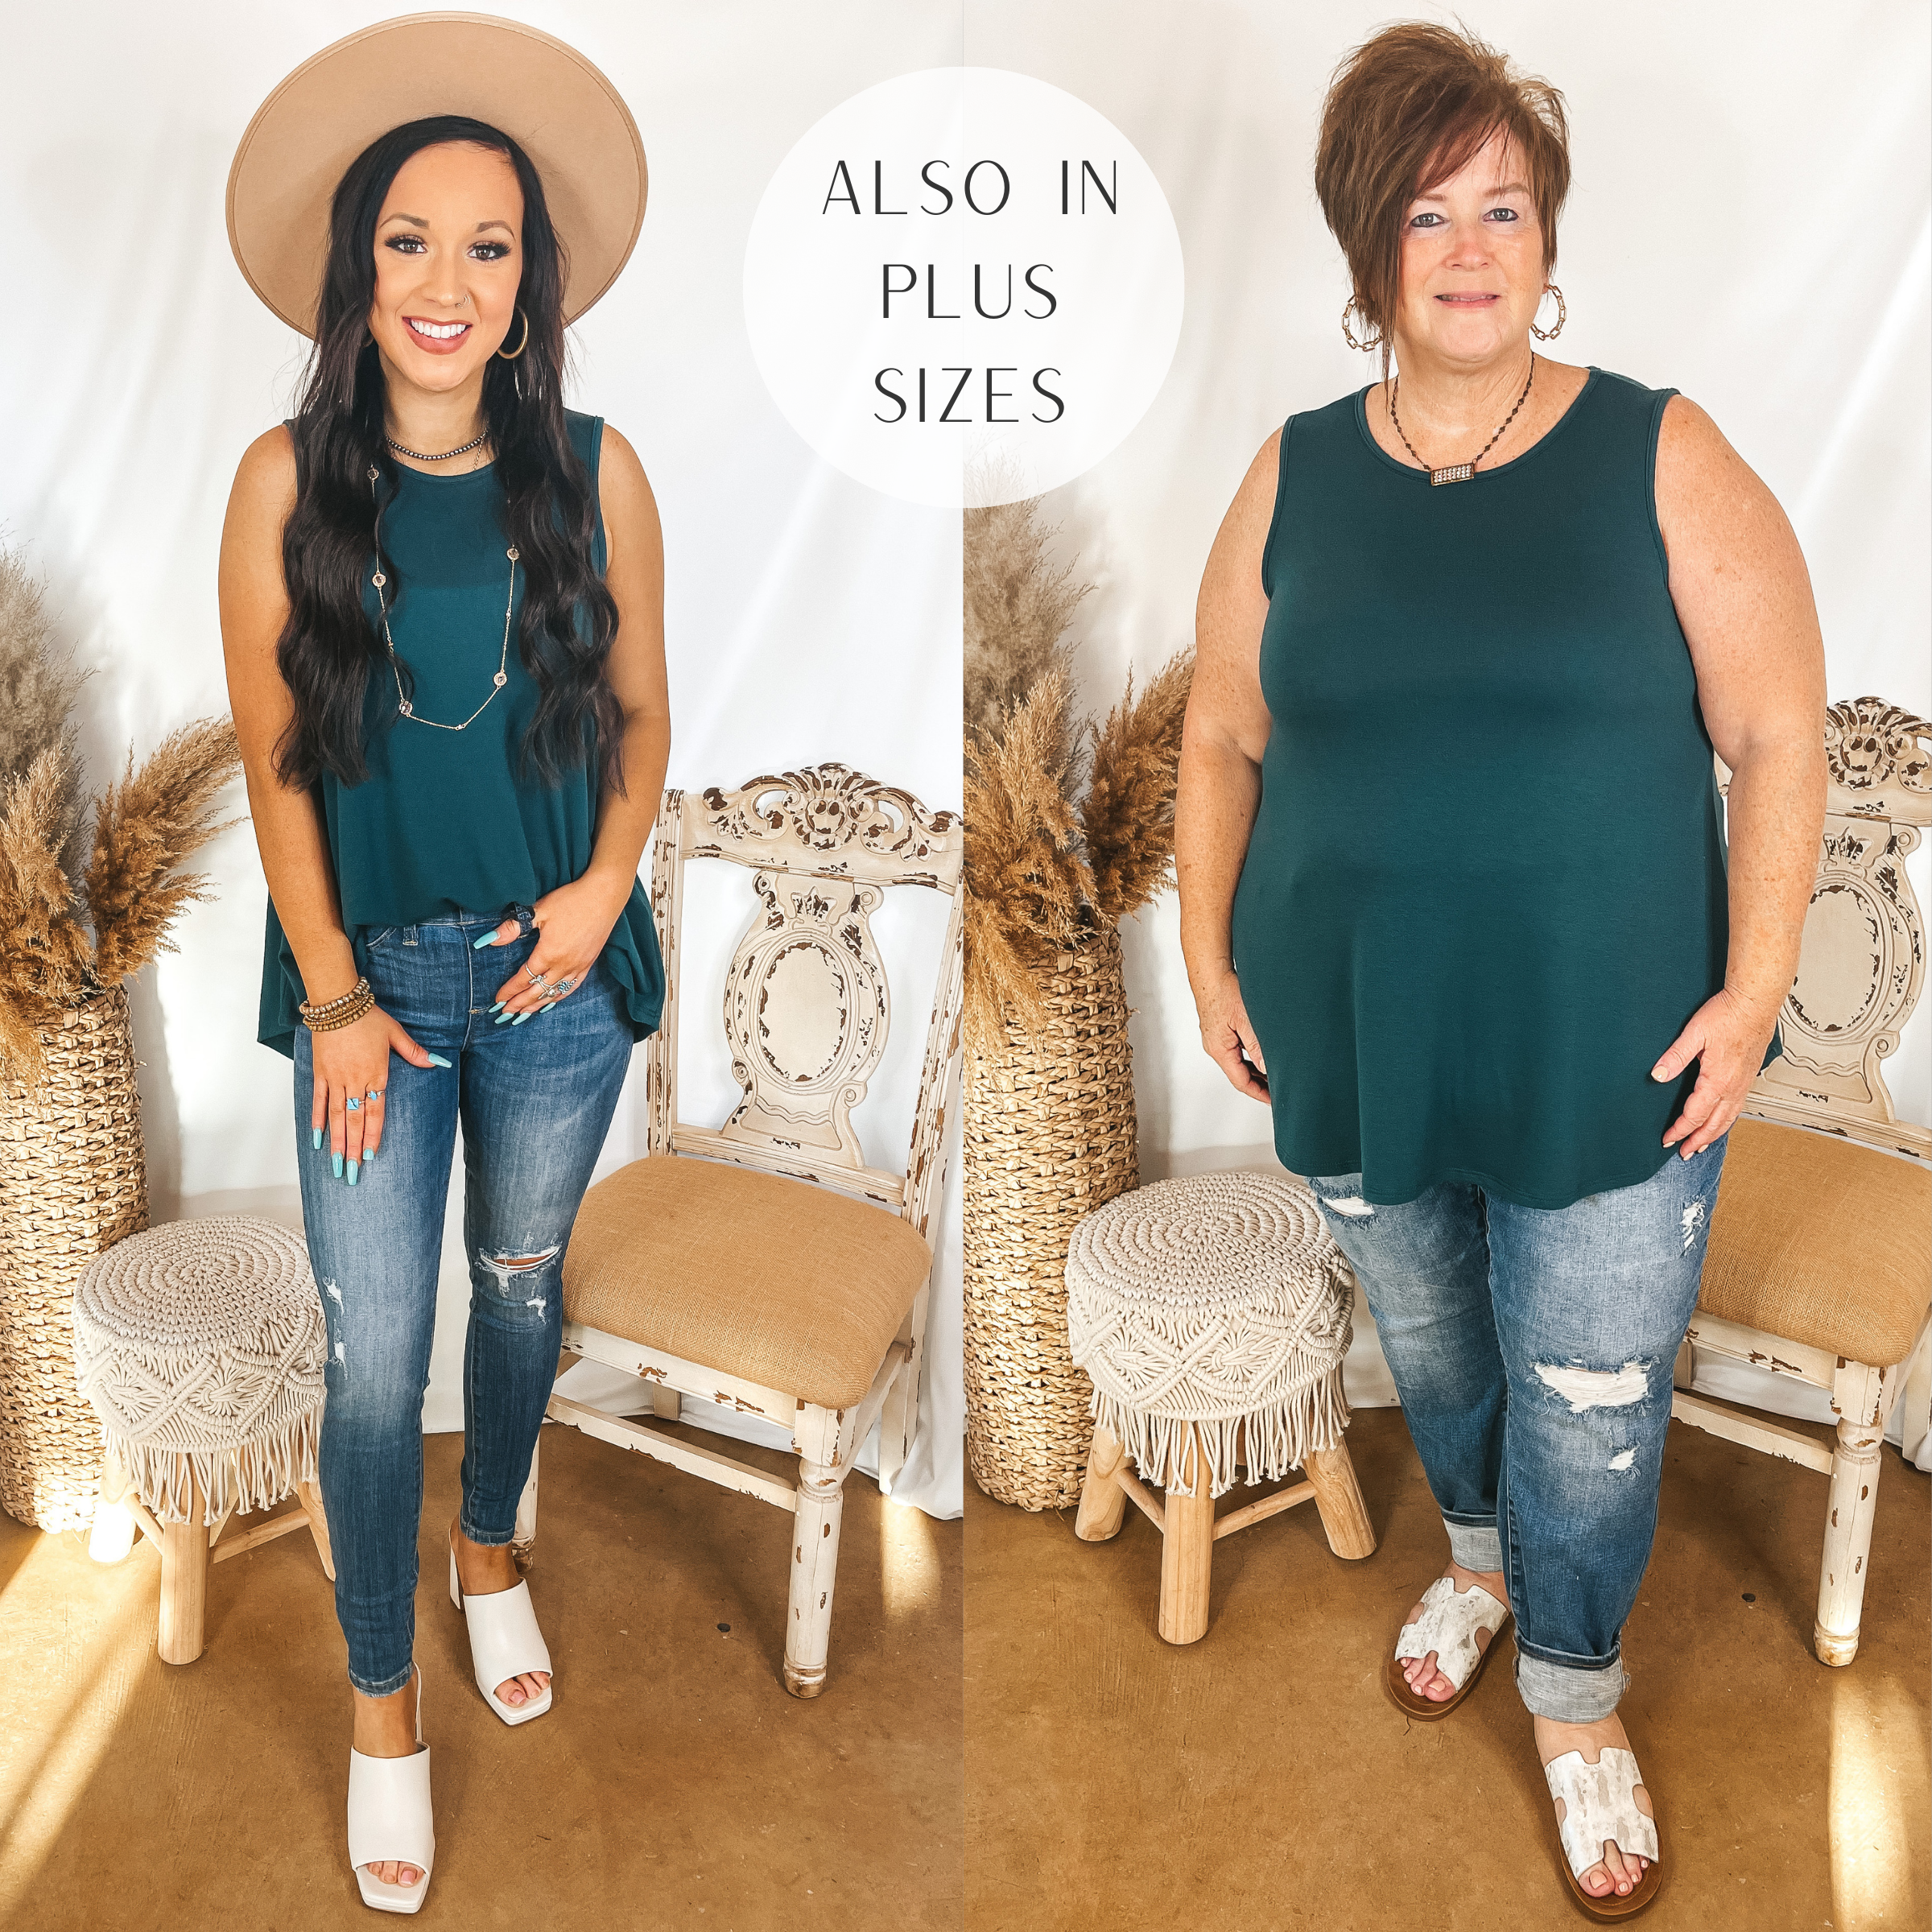 Models are wearing a dark teal tank top. Size small model has it paired with distressed skinny jeans, white heels, and a tan rancher hat. Plus size model has it paired with boyfriend jeans, white sandals, and Pink Panache jewelry.